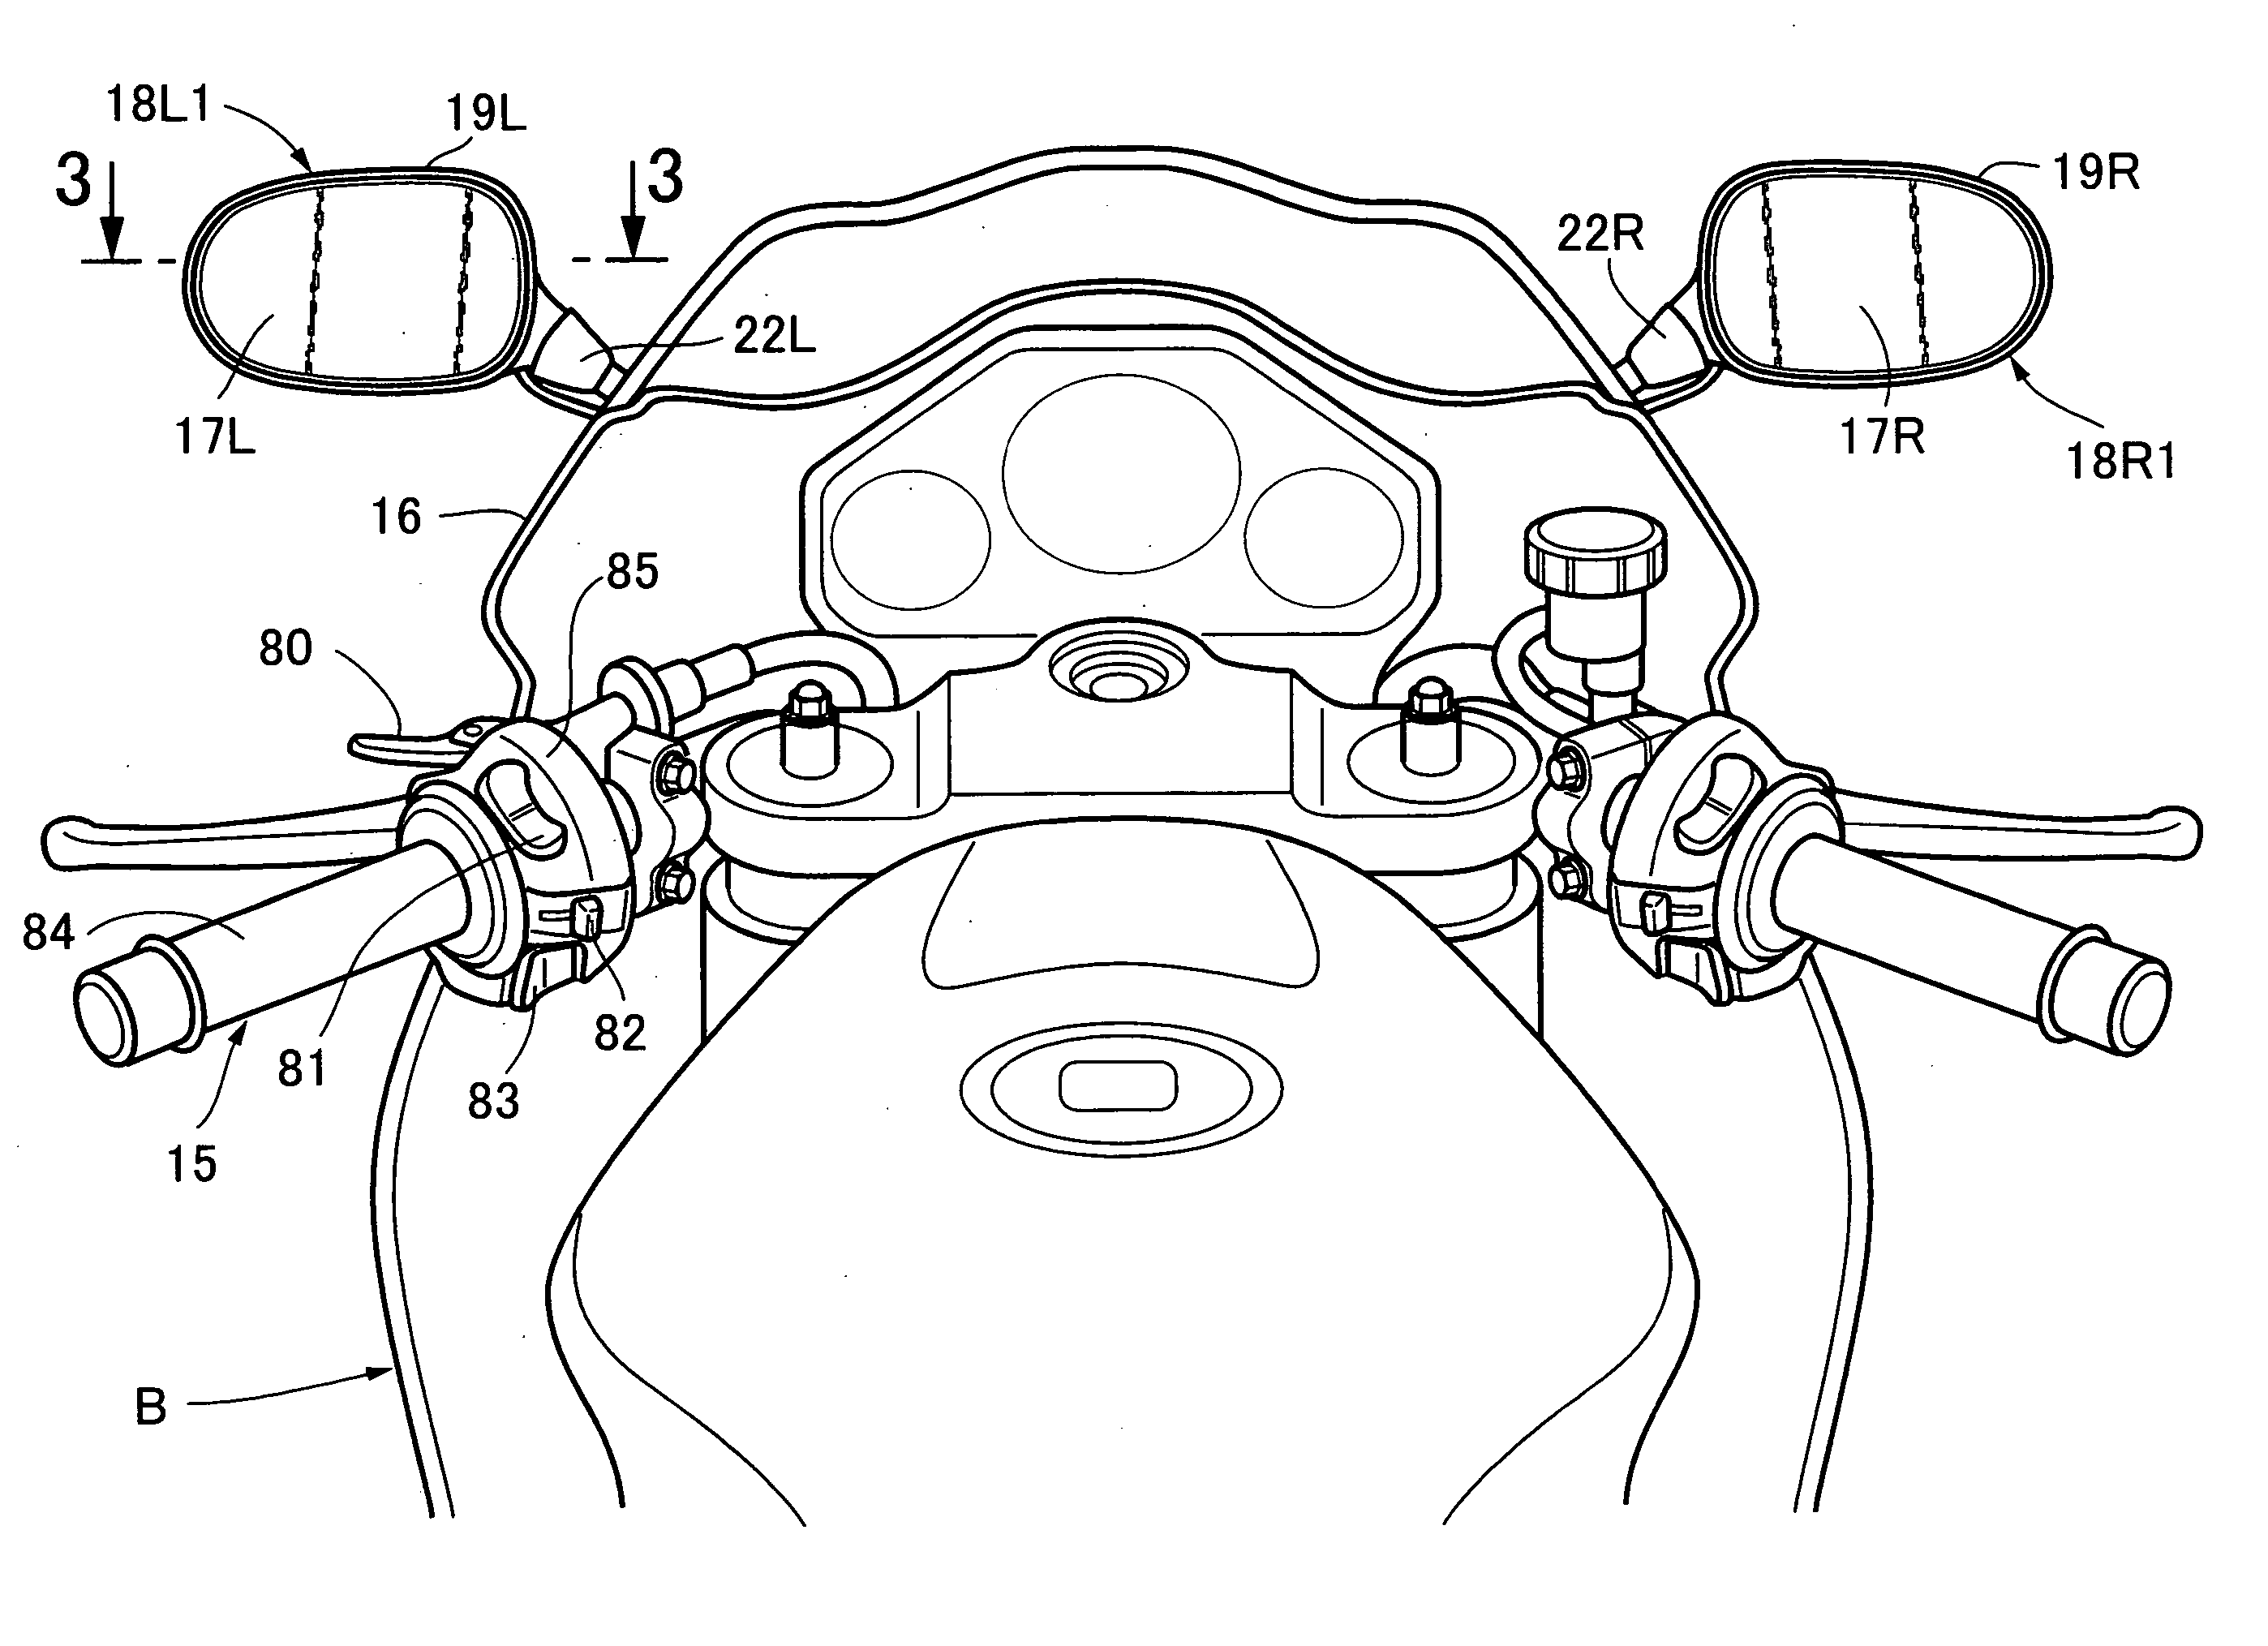 Open vehicle rear view system